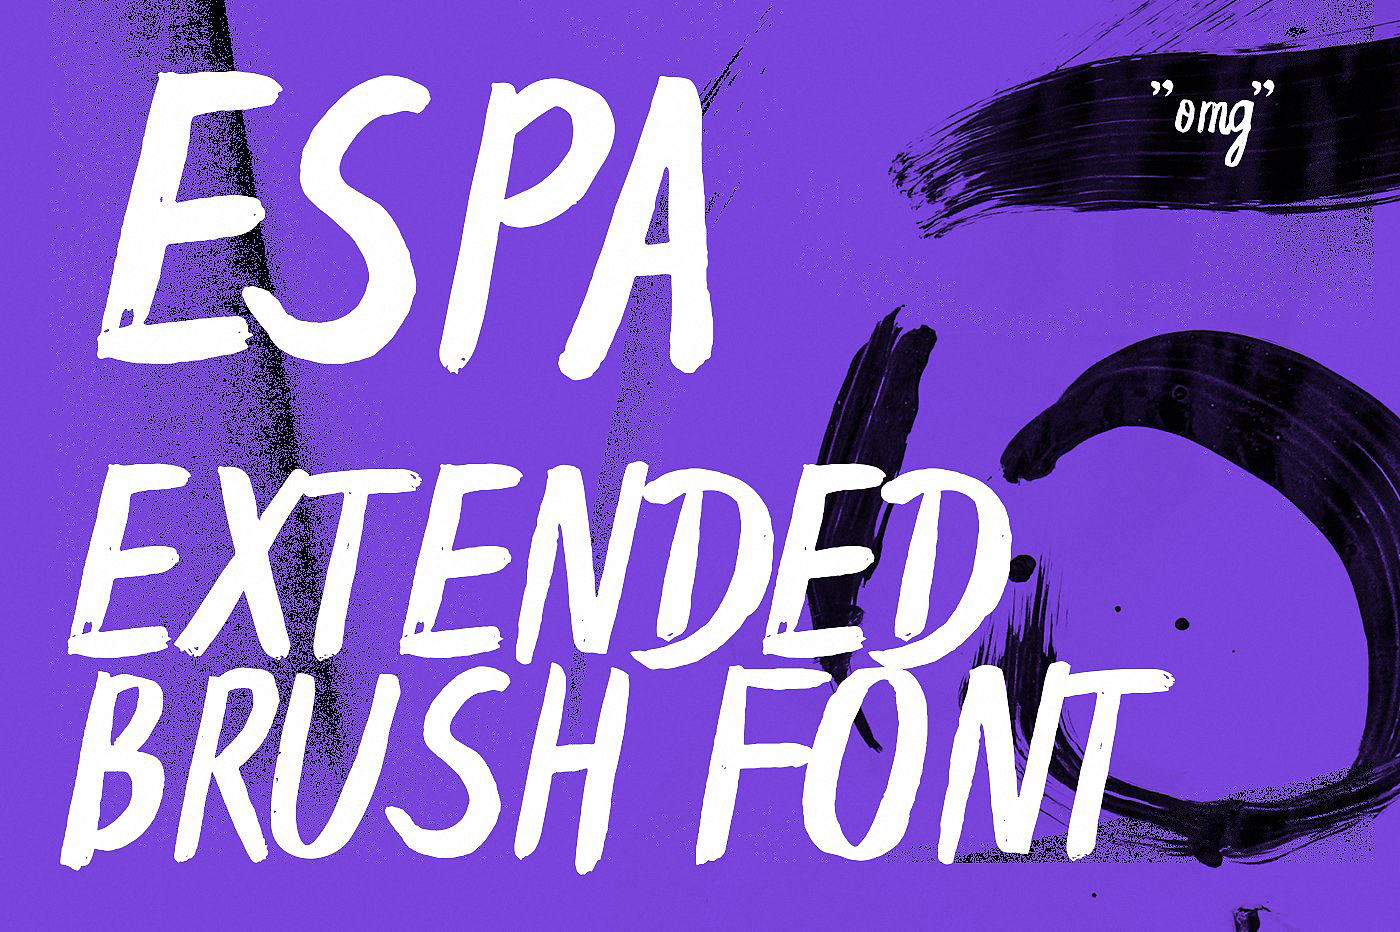 Font Espa Extended